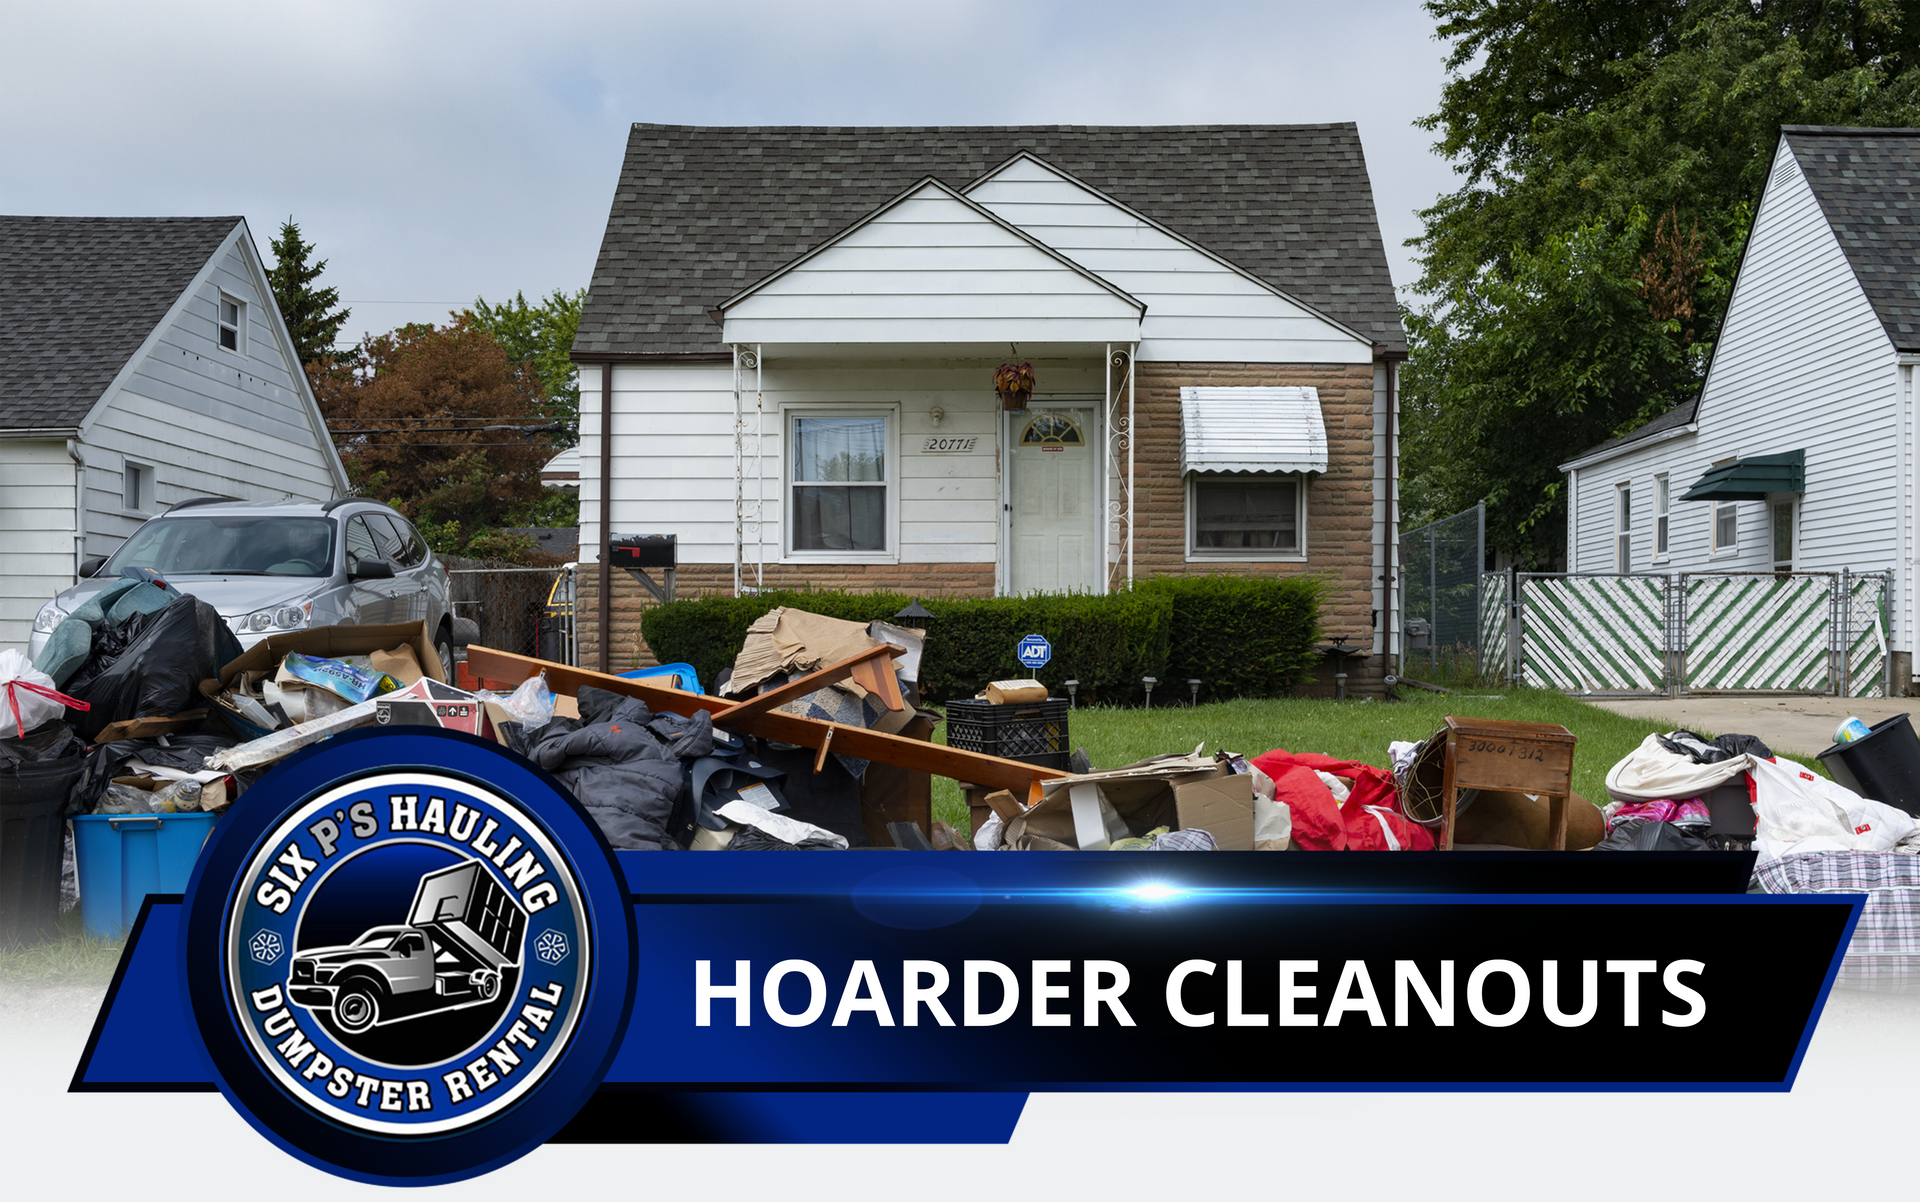 Hoarder Cleanouts in Claremont, CA